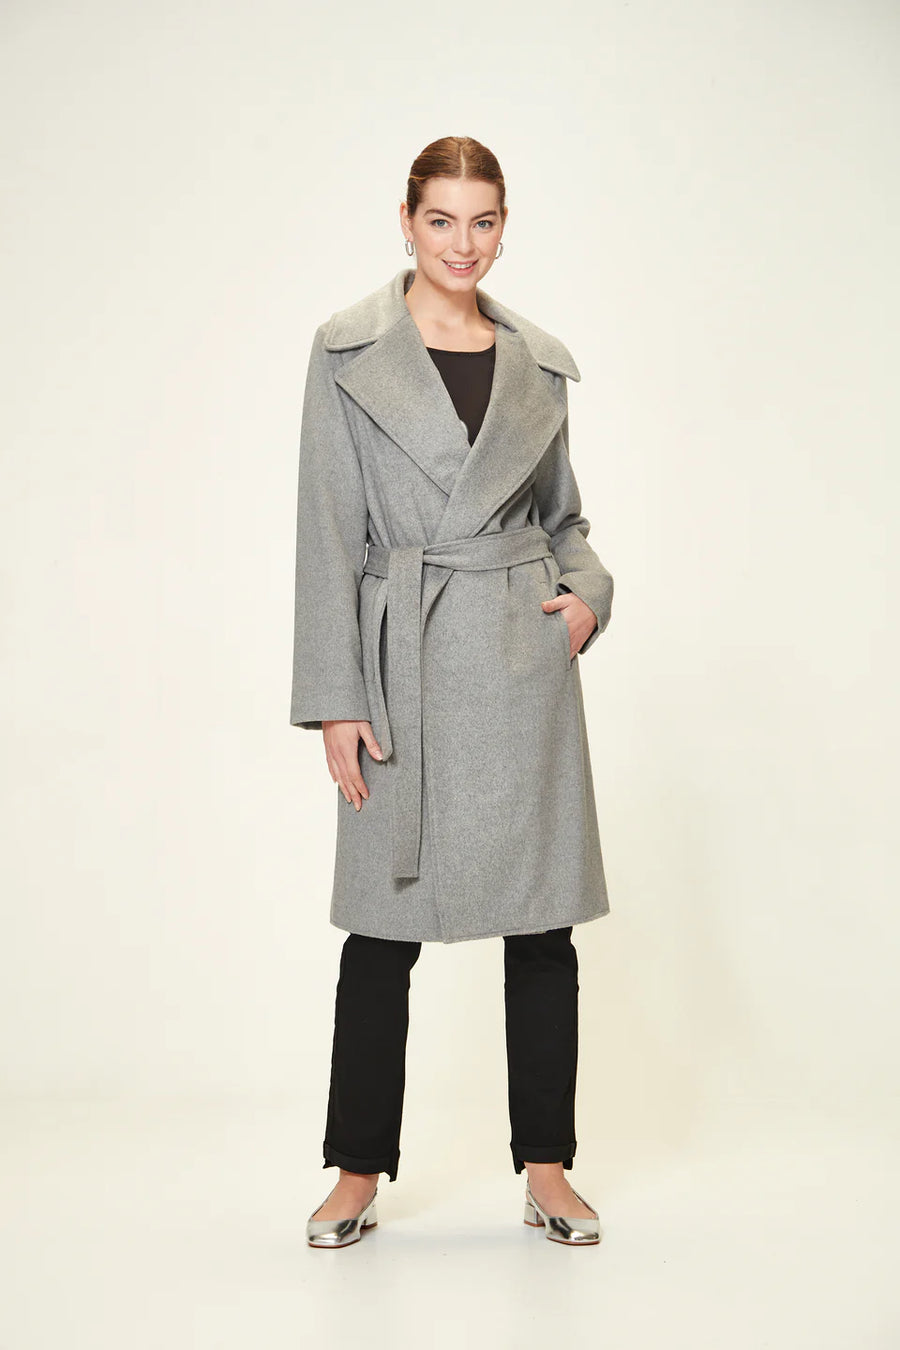 Foxtail Coat by Verge